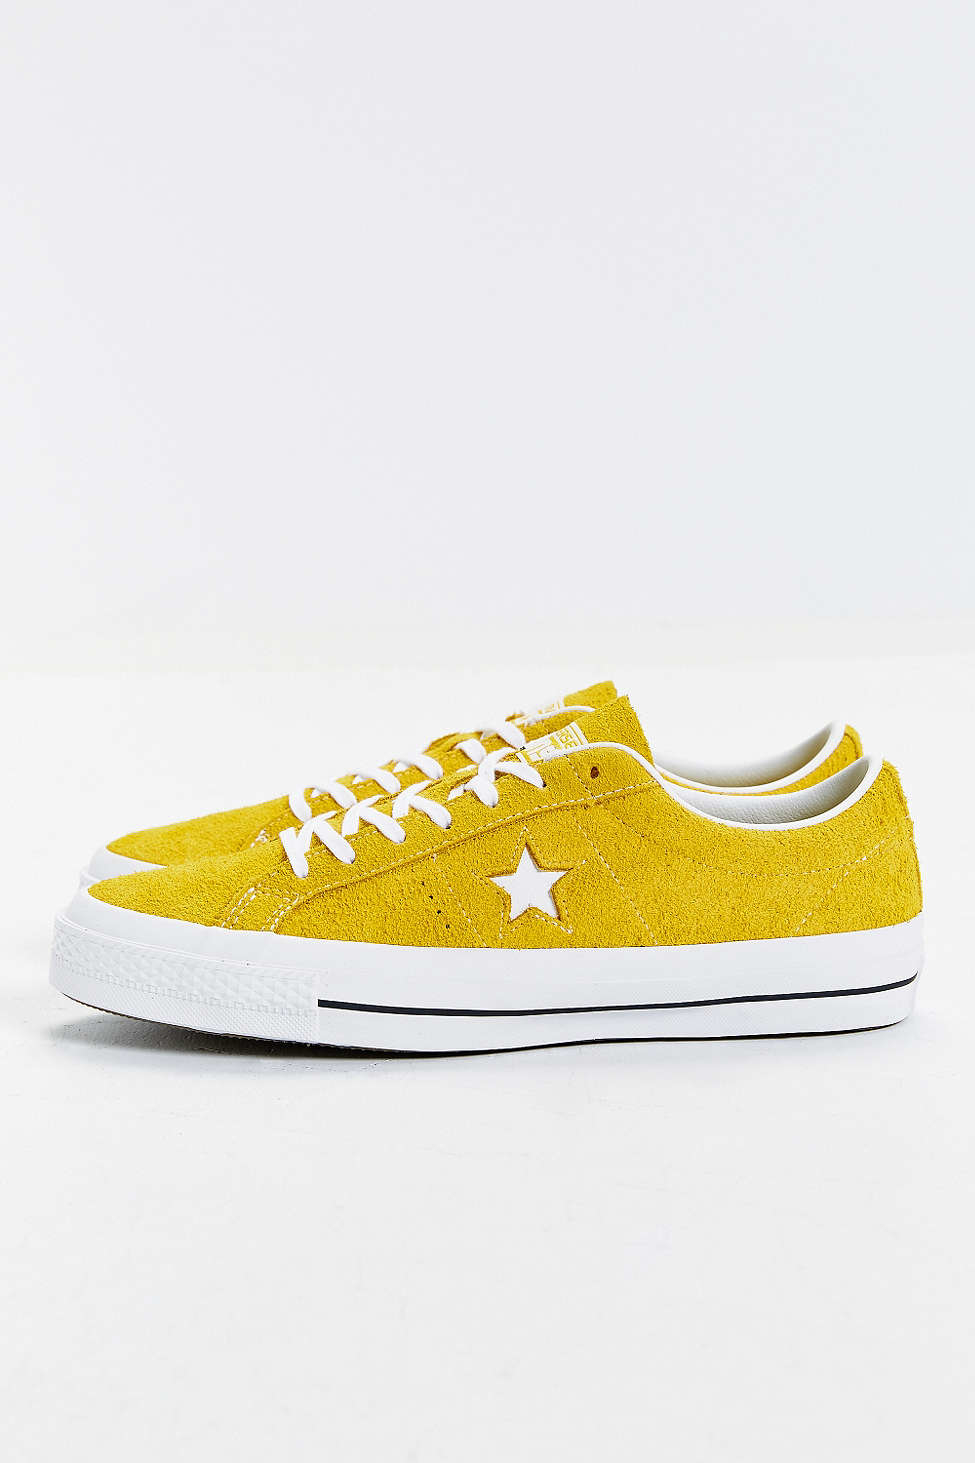 converse one star suede sneaker yellow